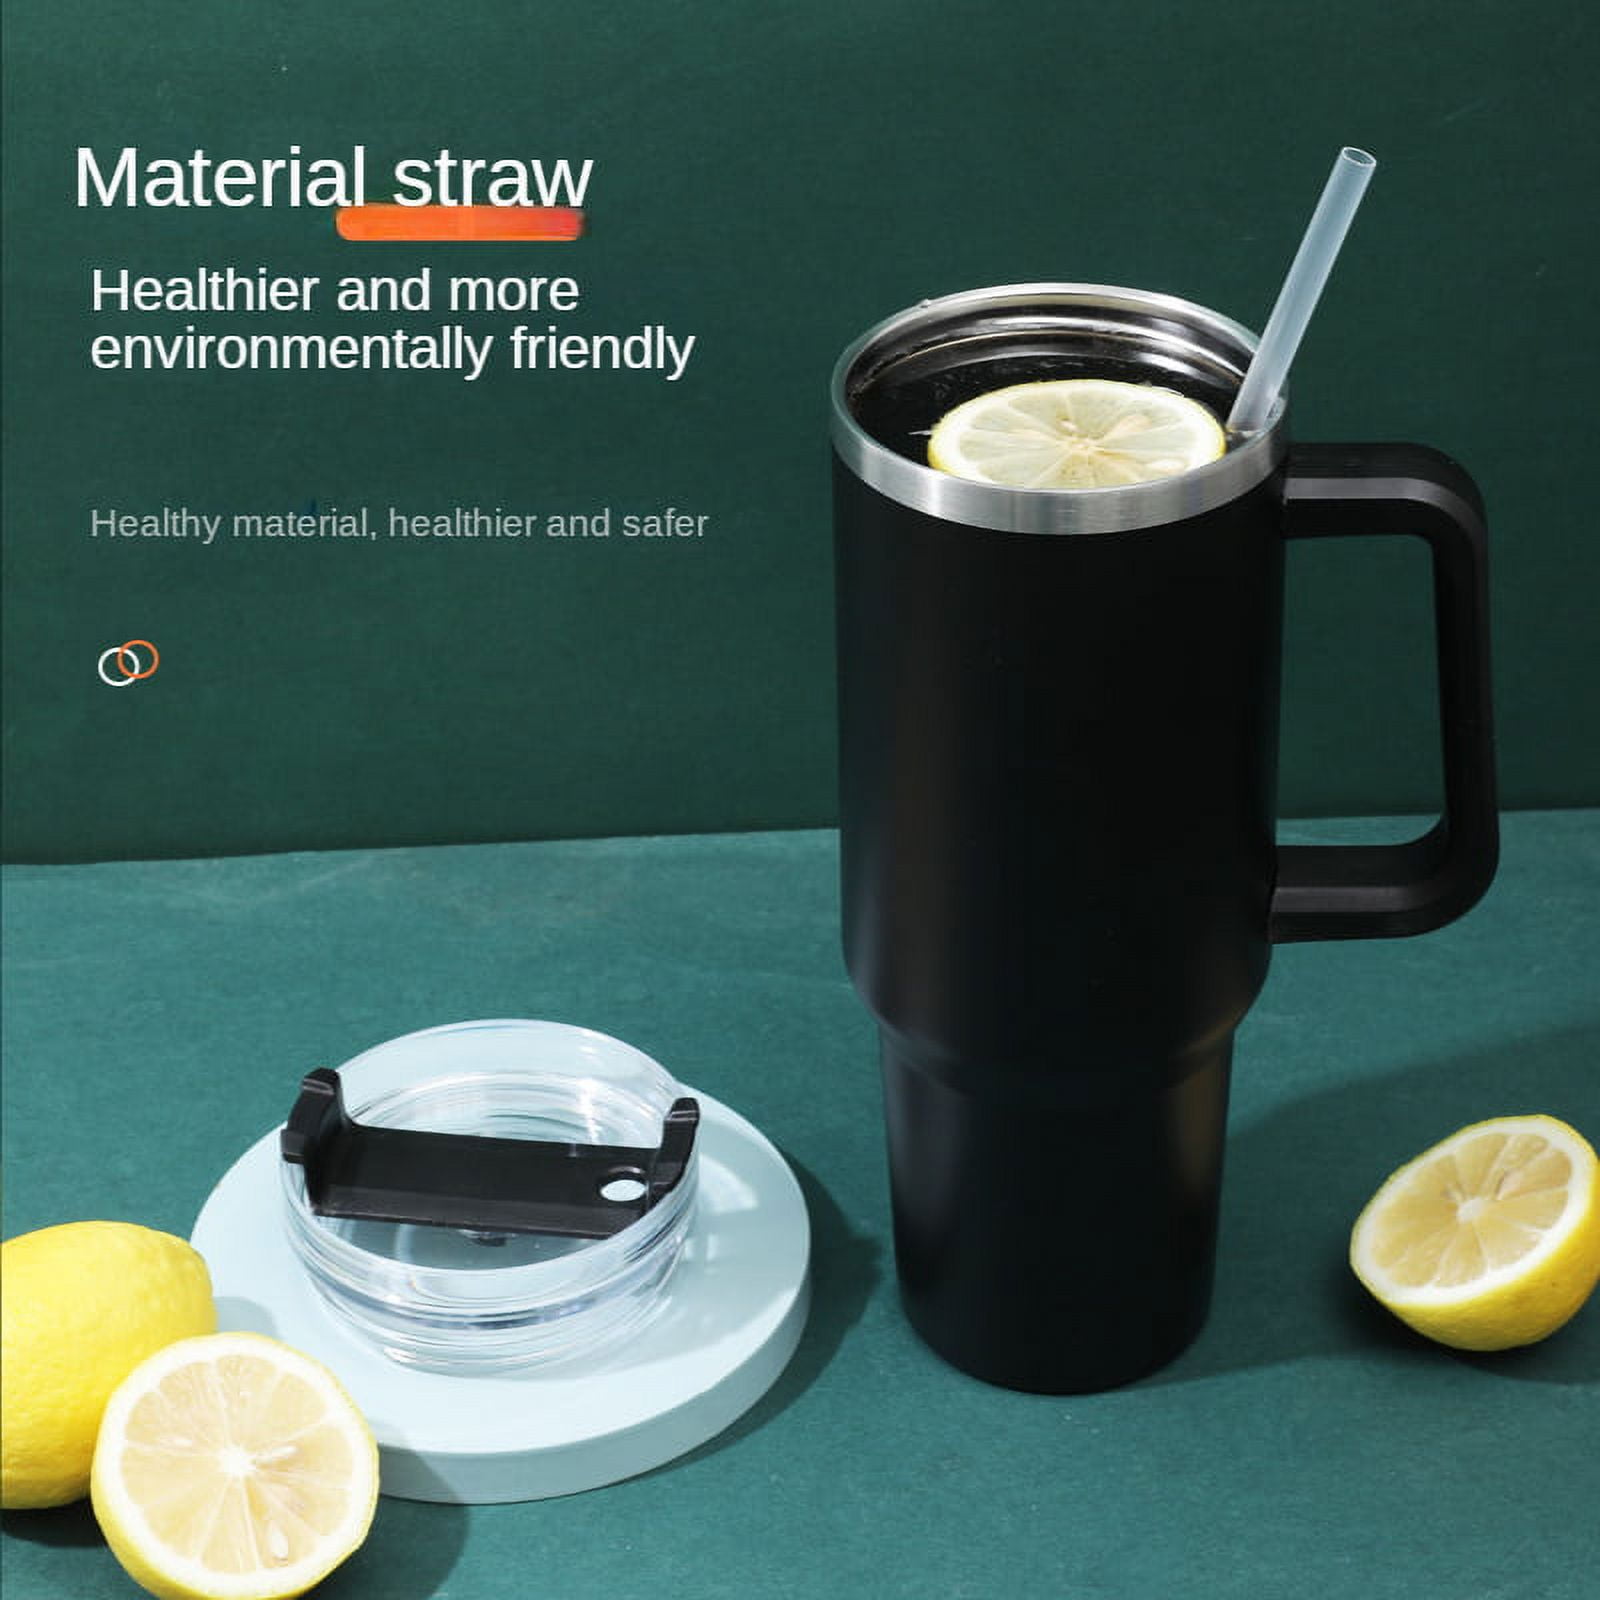 Stainless Steel Tumbler 40oz, Handle, Tie Dye, Straw, Coffee Termos Cup  GG1208 From Bestoffers, $3.97